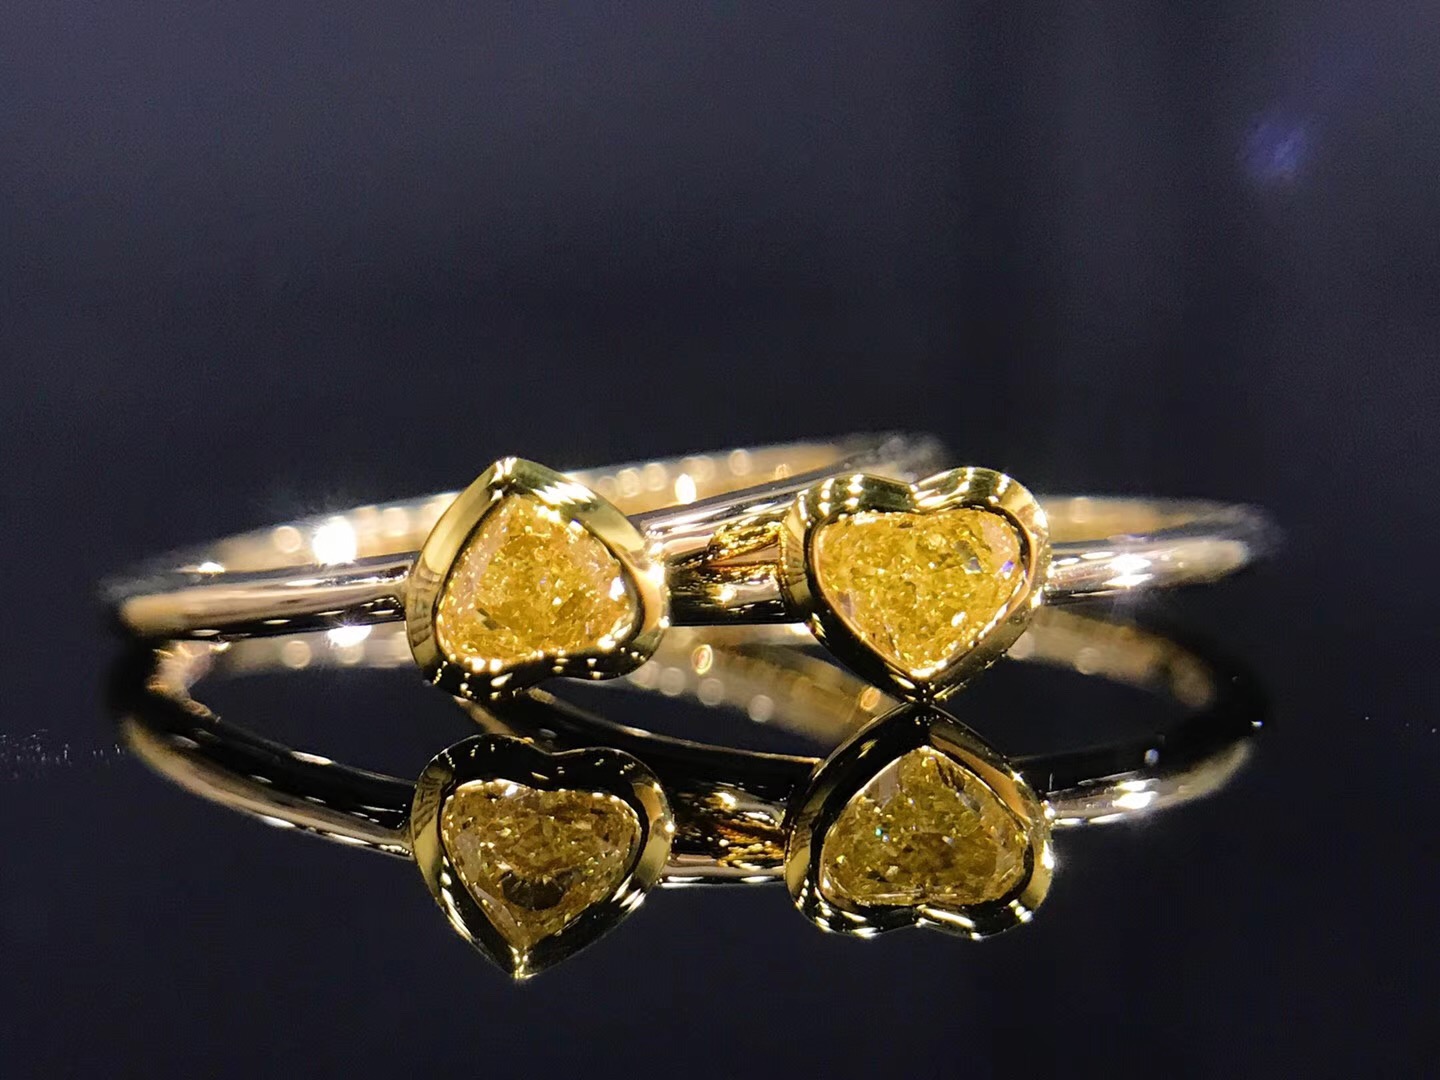 P00825 Heart Shaped Yellow Diamond Ring in 18k Gold